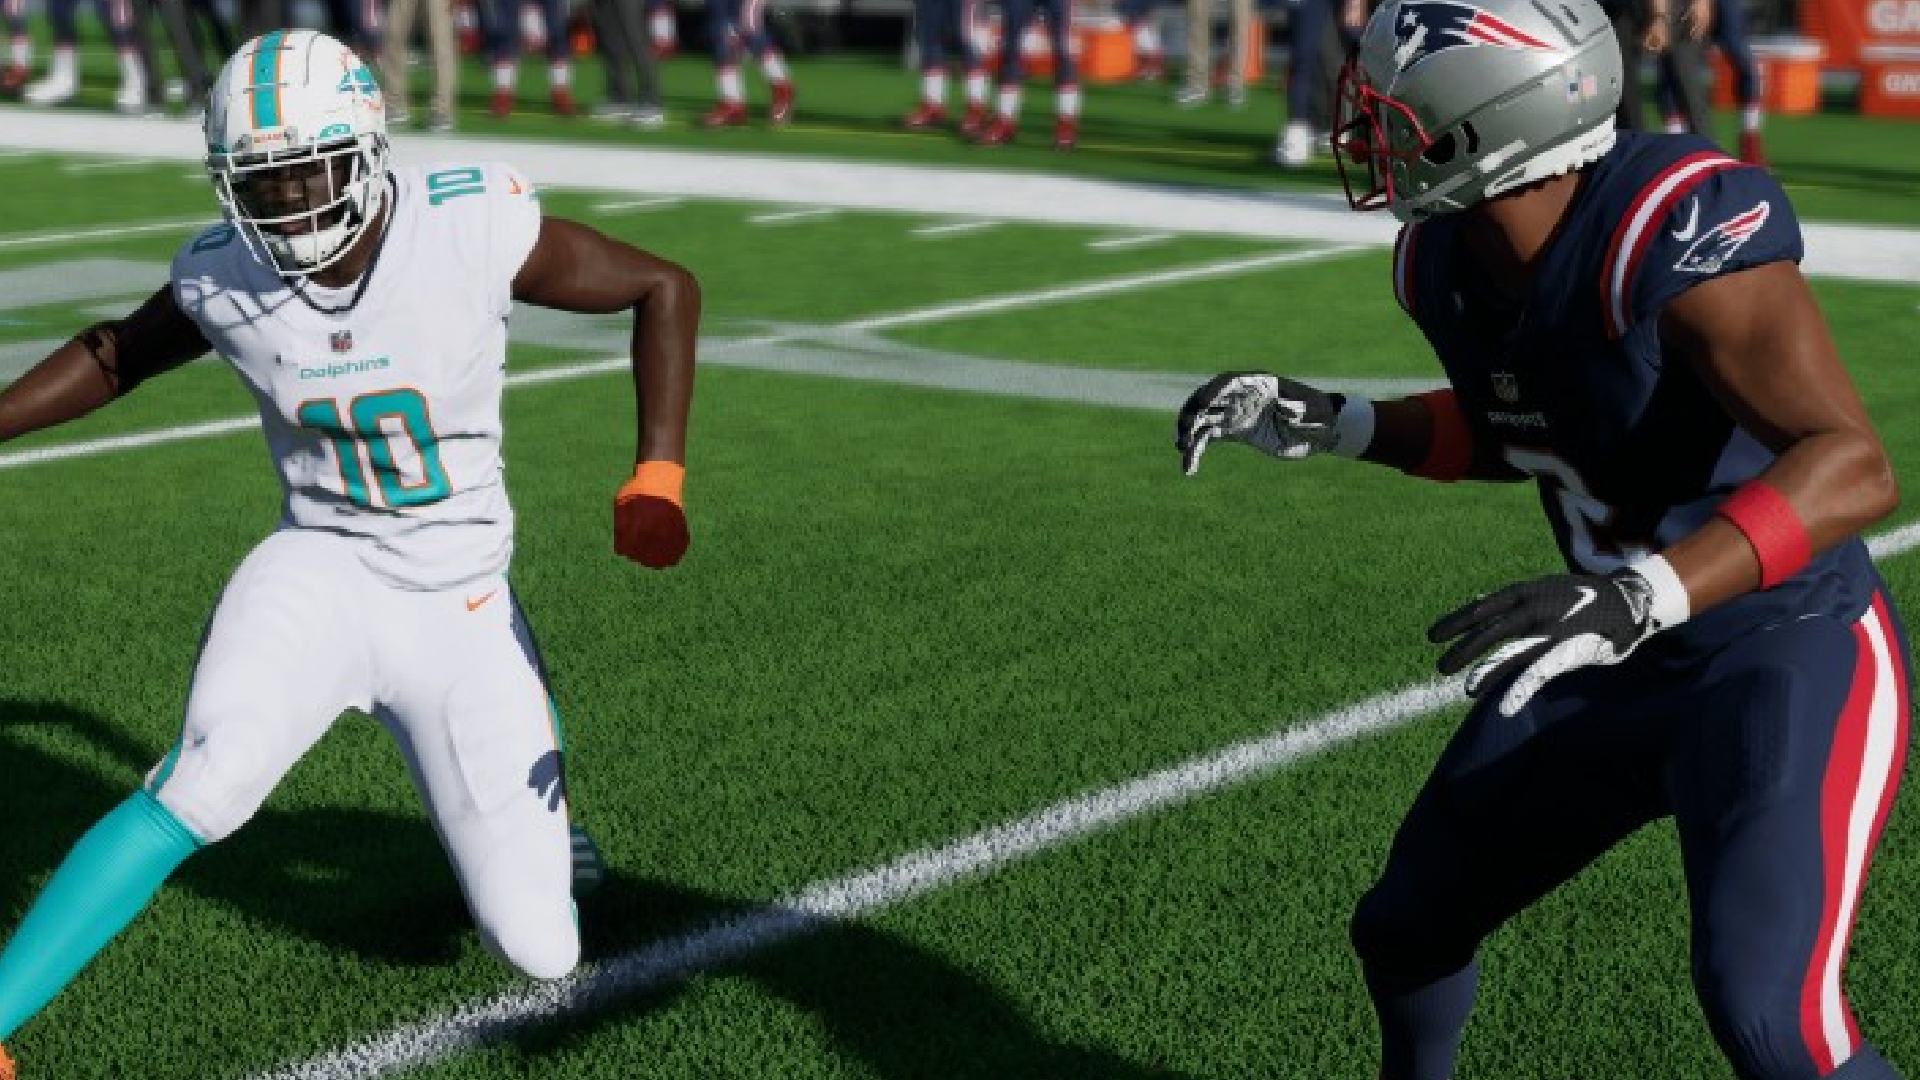 madden 23 on game pass